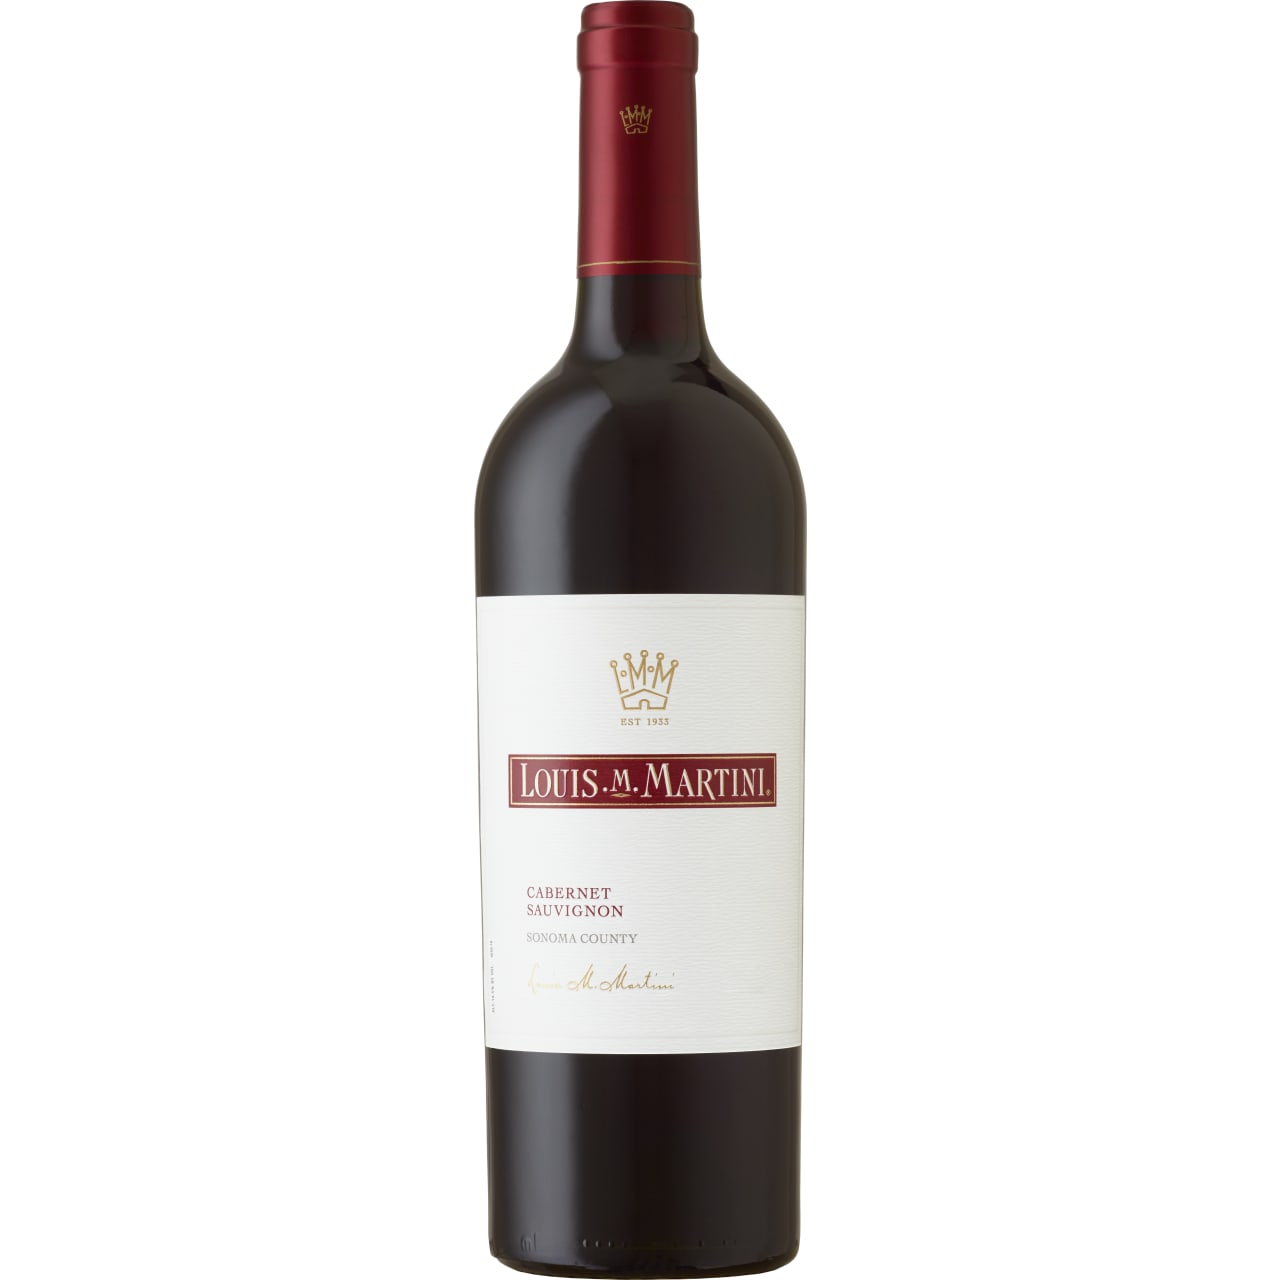 The wine offers ripe flavours of blackcurrant and jammy black plum accented by notes of caramelised oak and sweet spice. Currant and jammy black plum accented by notes of caramelised oak and sweet spice.